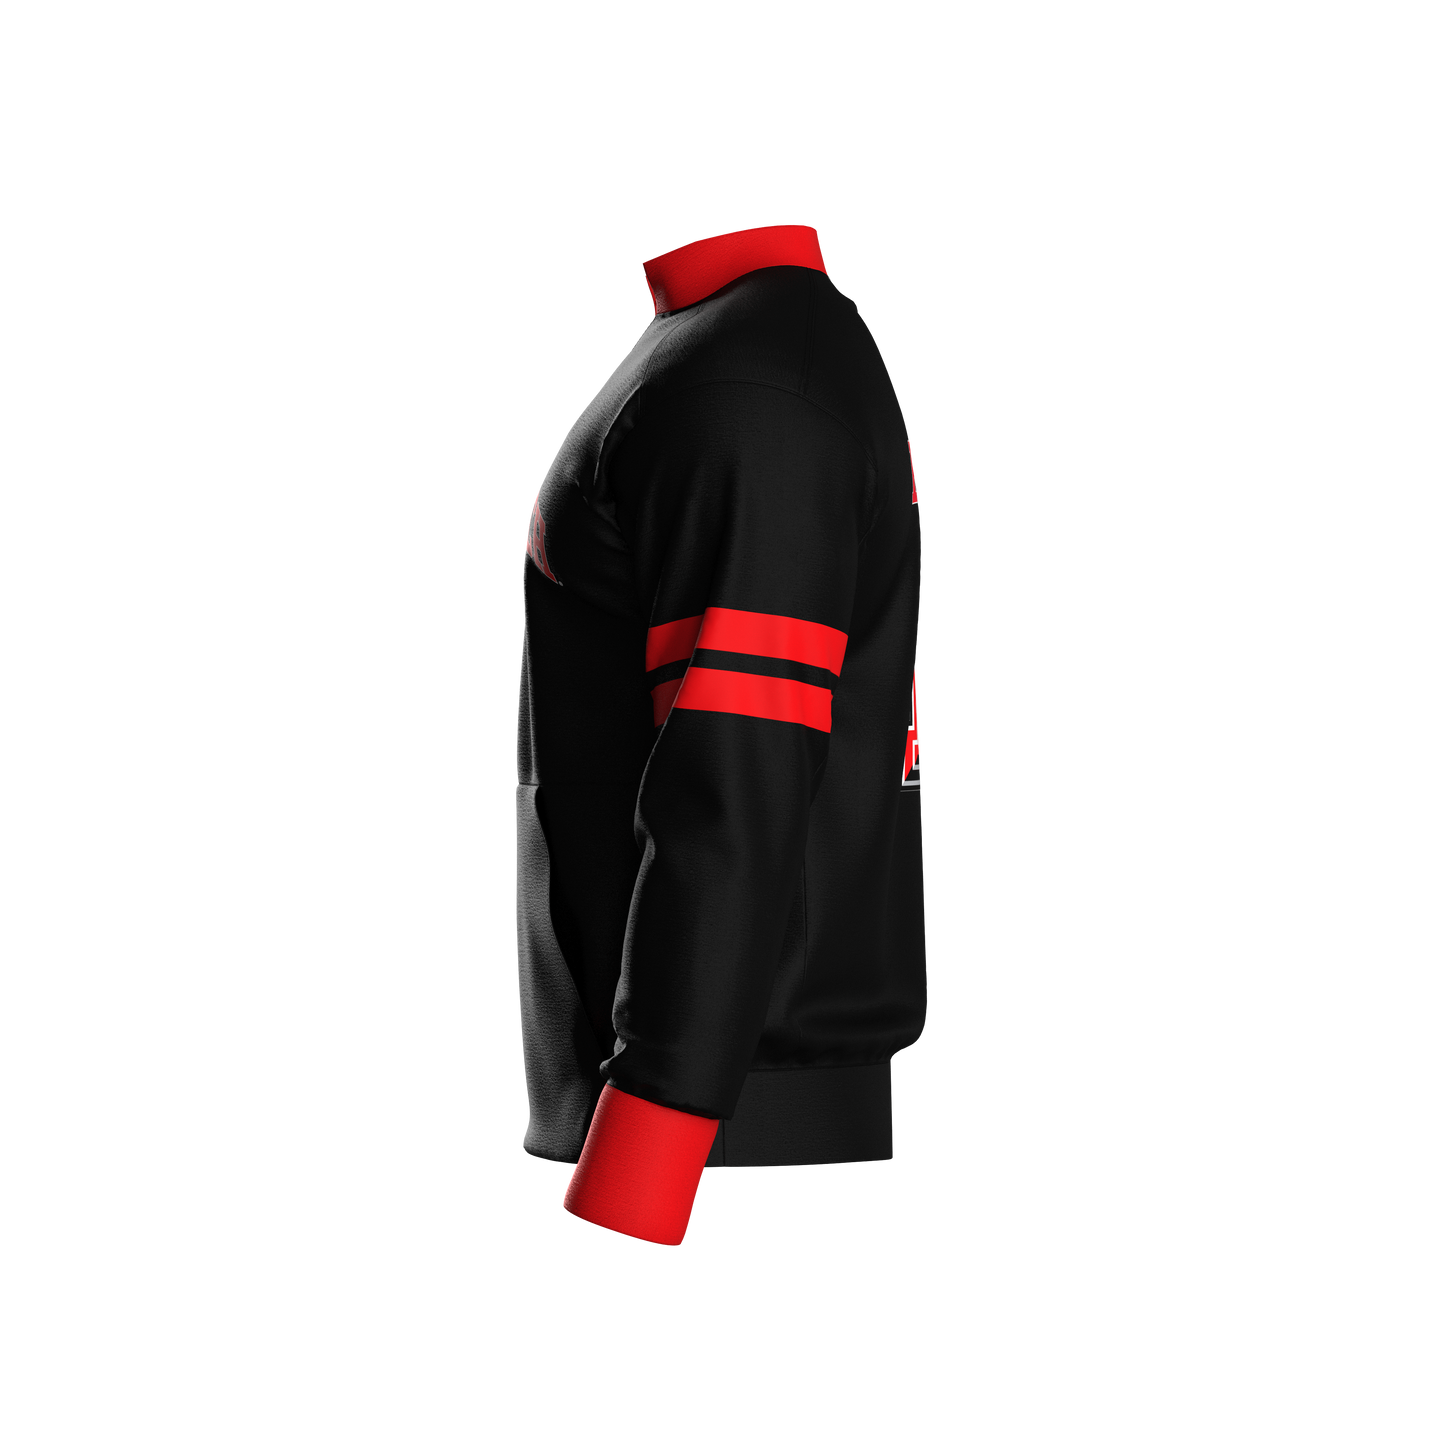 Texas Tech University Home Pullover (adult)